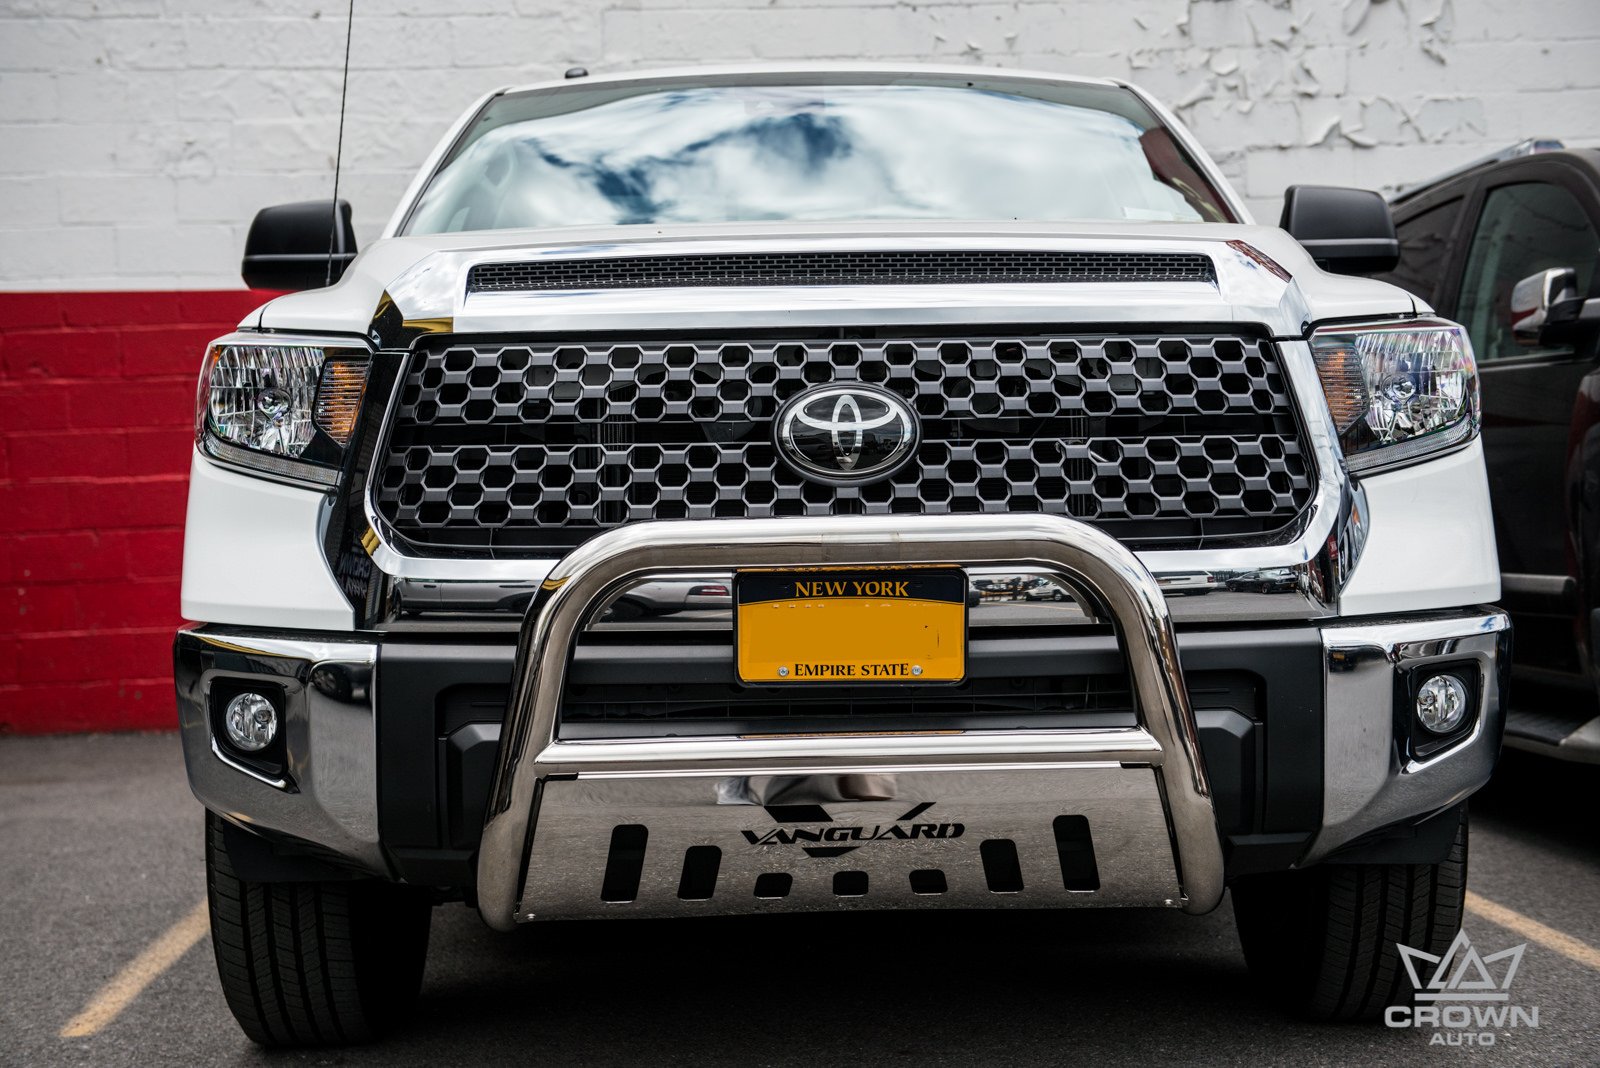 How much is car insurance for a Toyota Tundra?